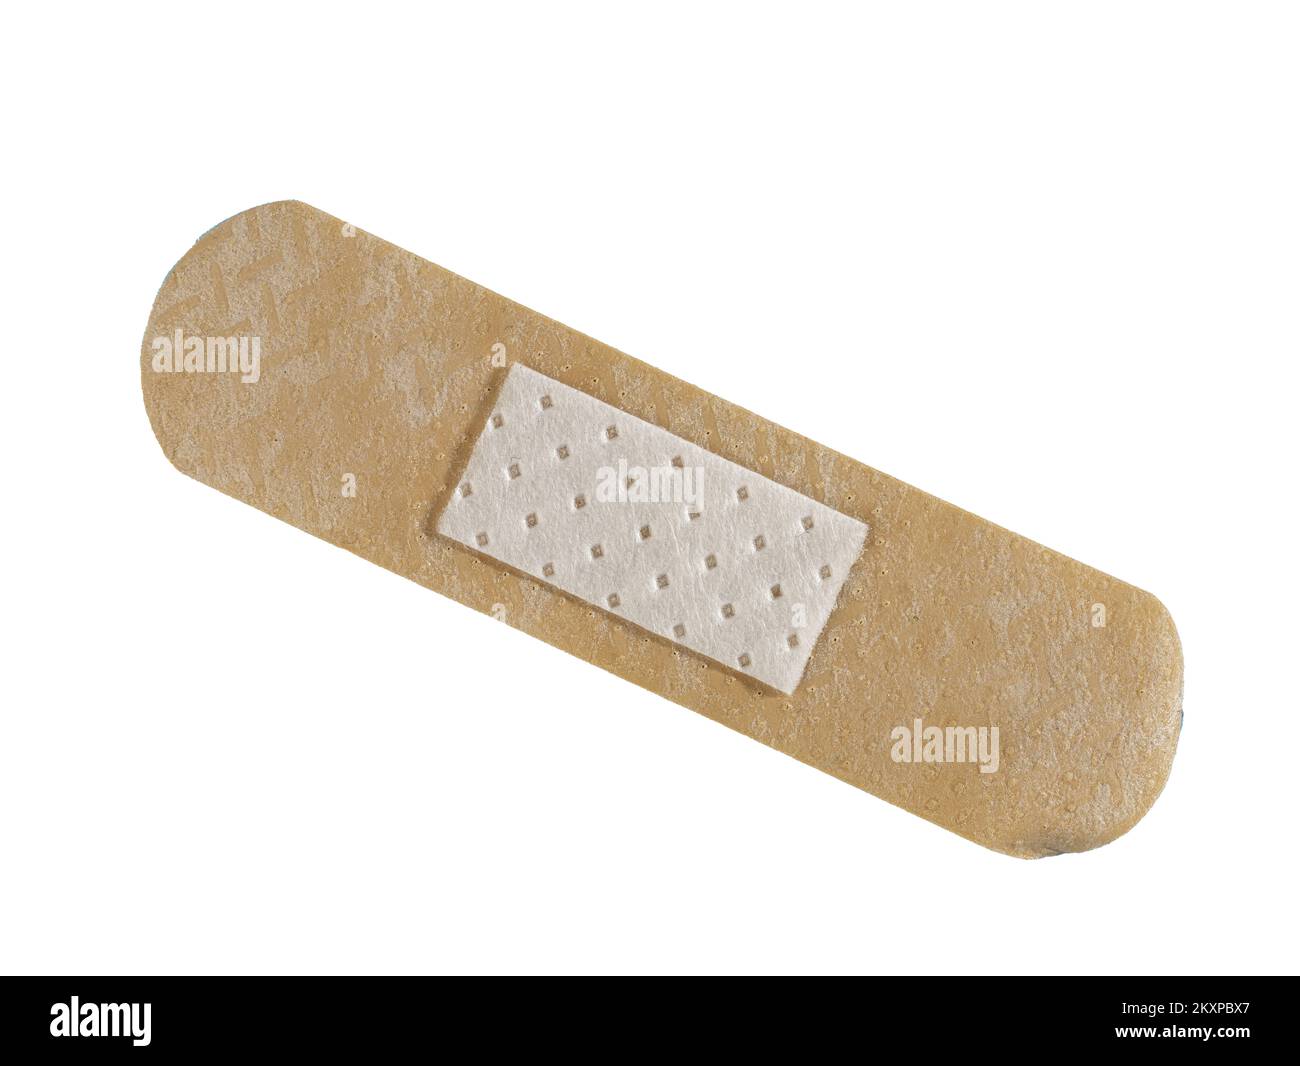 a plaster on a transparent surface Stock Photo